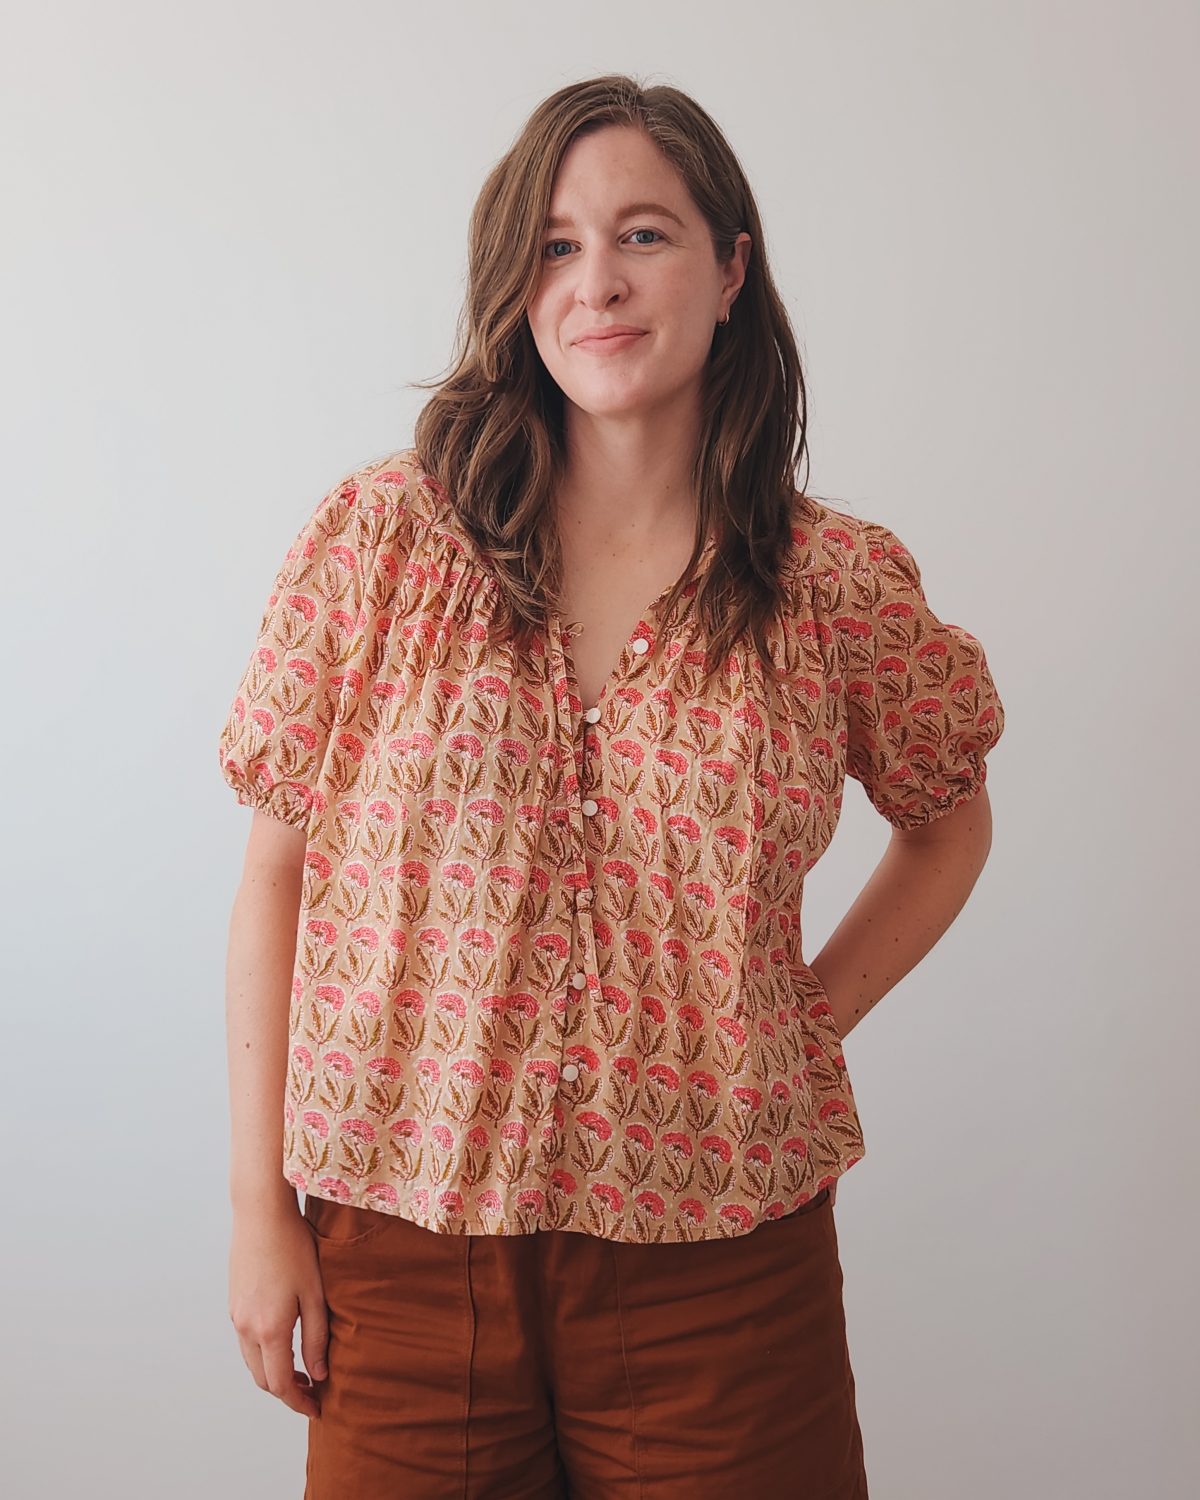 Nusch Blouse – The Sewing Things Blog